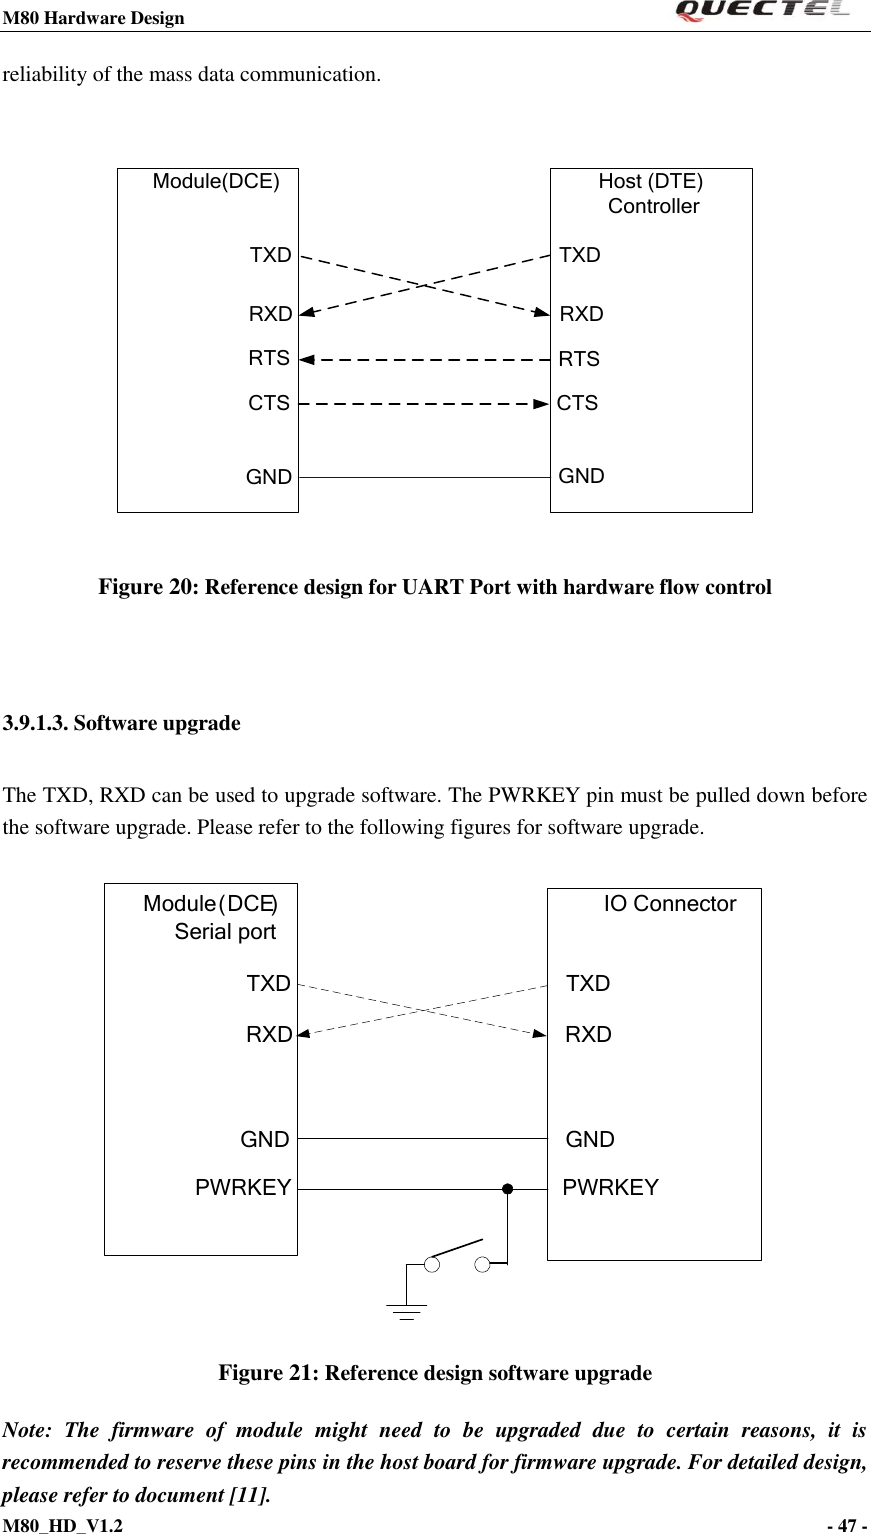 M80 Hardware Design                                                                M80_HD_V1.2                                                                                                                                        - 47 -    reliability of the mass data communication.  Host (DTE) Controller         Module(DCE)RTSCTSRTSCTSGNDRXDTXD TXDRXDGND Figure 20: Reference design for UART Port with hardware flow control  3.9.1.3. Software upgrade The TXD, RXD can be used to upgrade software. The PWRKEY pin must be pulled down before the software upgrade. Please refer to the following figures for software upgrade.     IO Connector TXDRXDGNDPWRKEY Module (DCE)     Serial portTXDRXDGNDPWRKEY Figure 21: Reference design software upgrade Note:  The  firmware  of  module  might  need  to  be  upgraded  due  to  certain  reasons,  it  is recommended to reserve these pins in the host board for firmware upgrade. For detailed design, please refer to document [11]. 